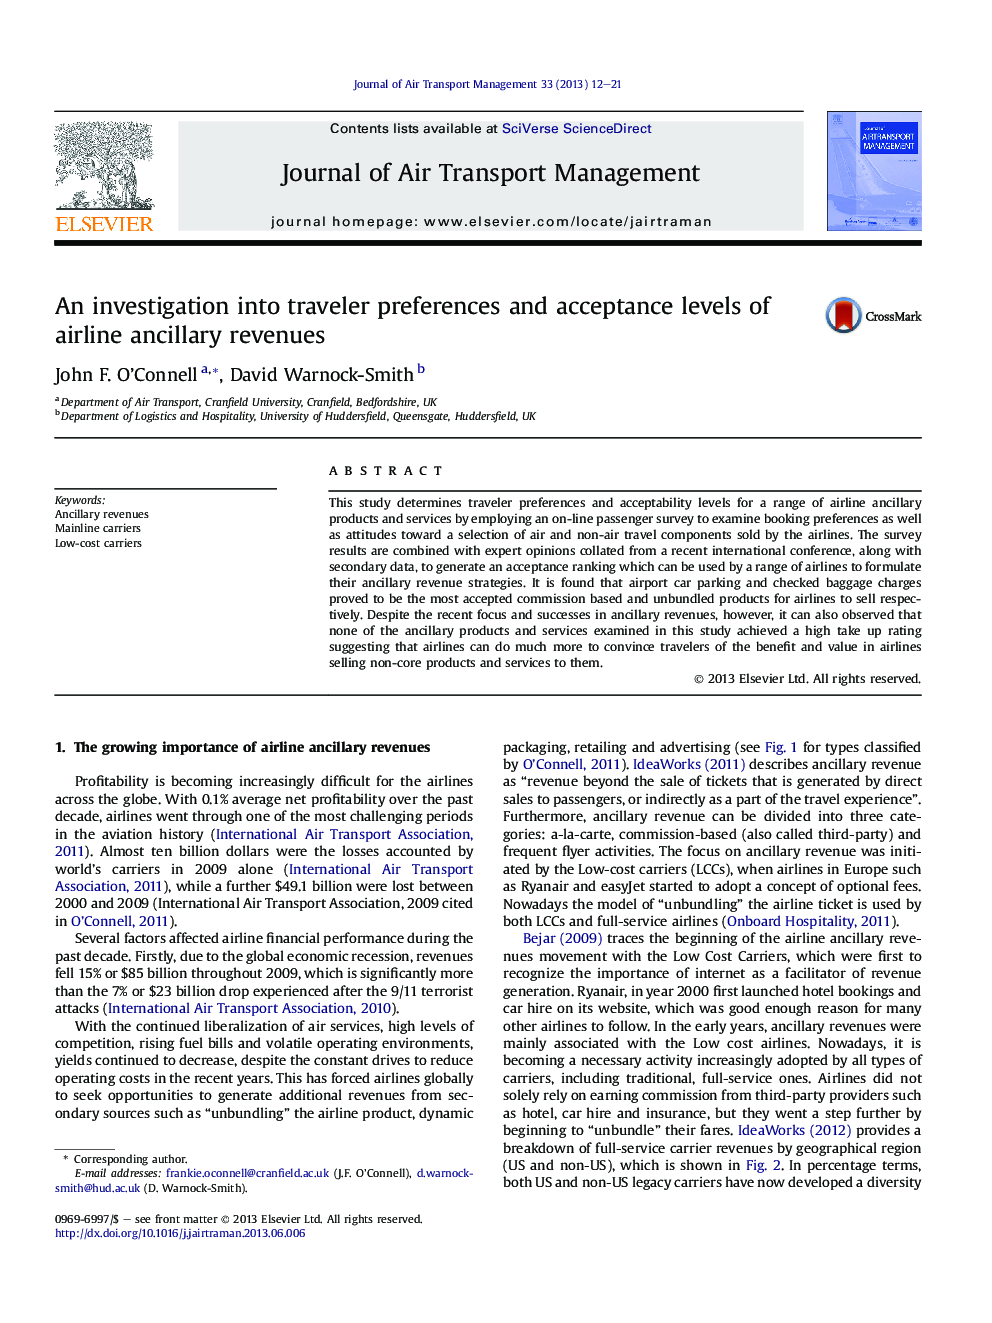 An investigation into traveler preferences and acceptance levels of airline ancillary revenues